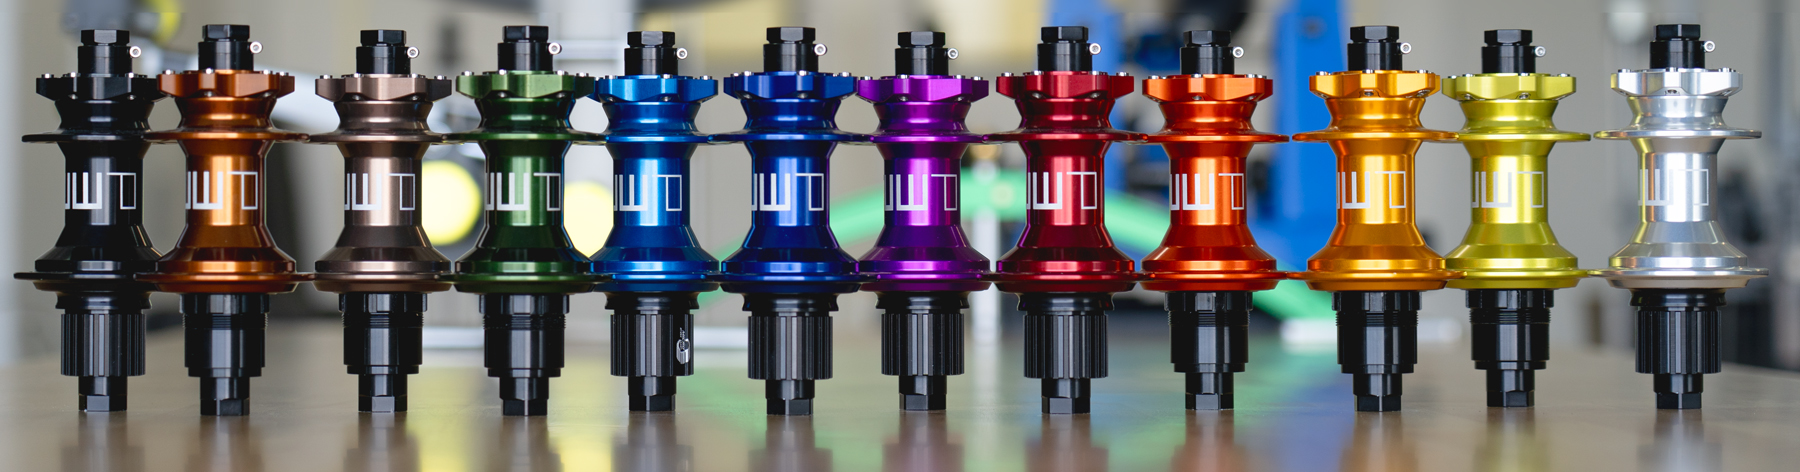 David Golay reviews the Project321 G3 Hubs for Blister